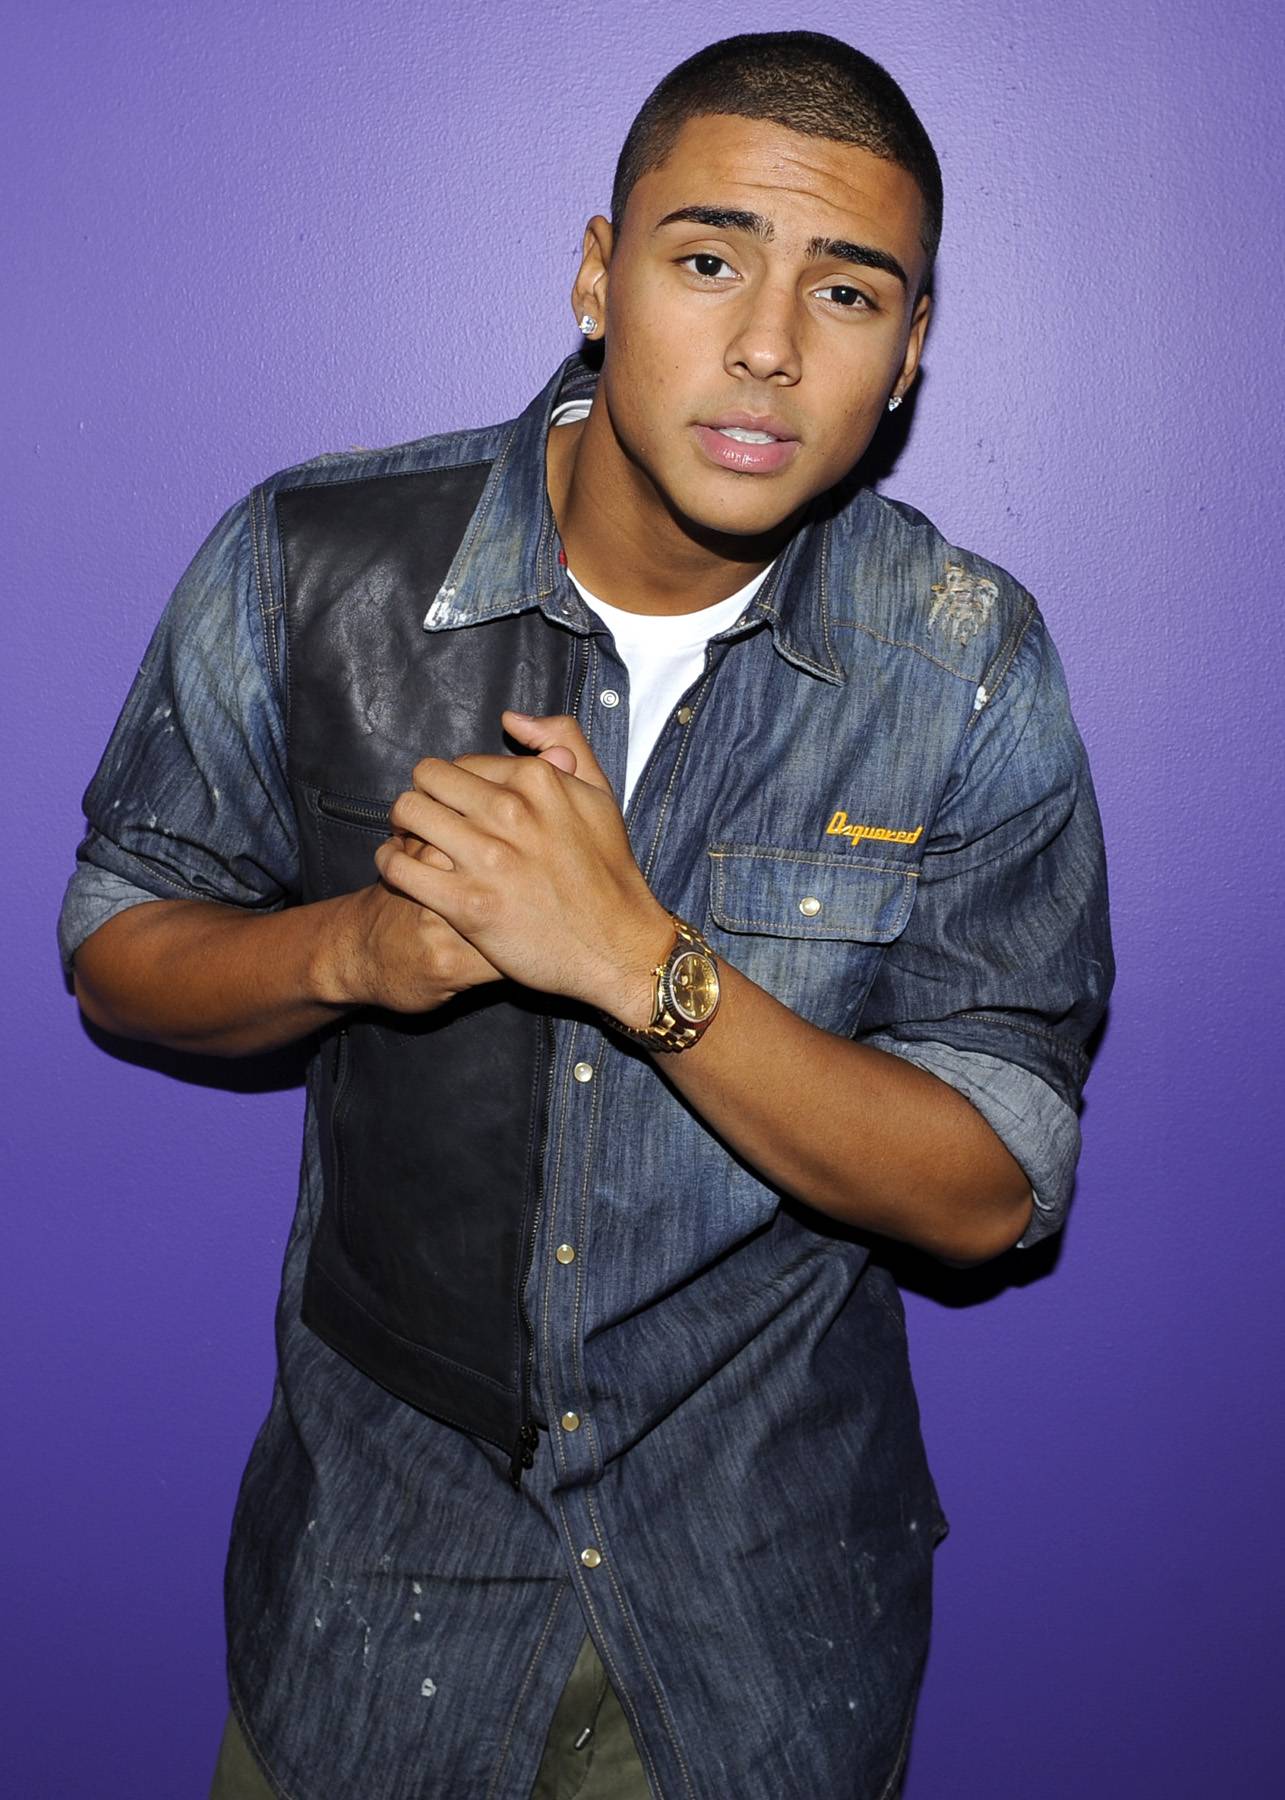 Pure Swag - Quincy Brown in the green room at 106 &amp; Park, May 3, 2012. (Photo: John Ricard / BET)